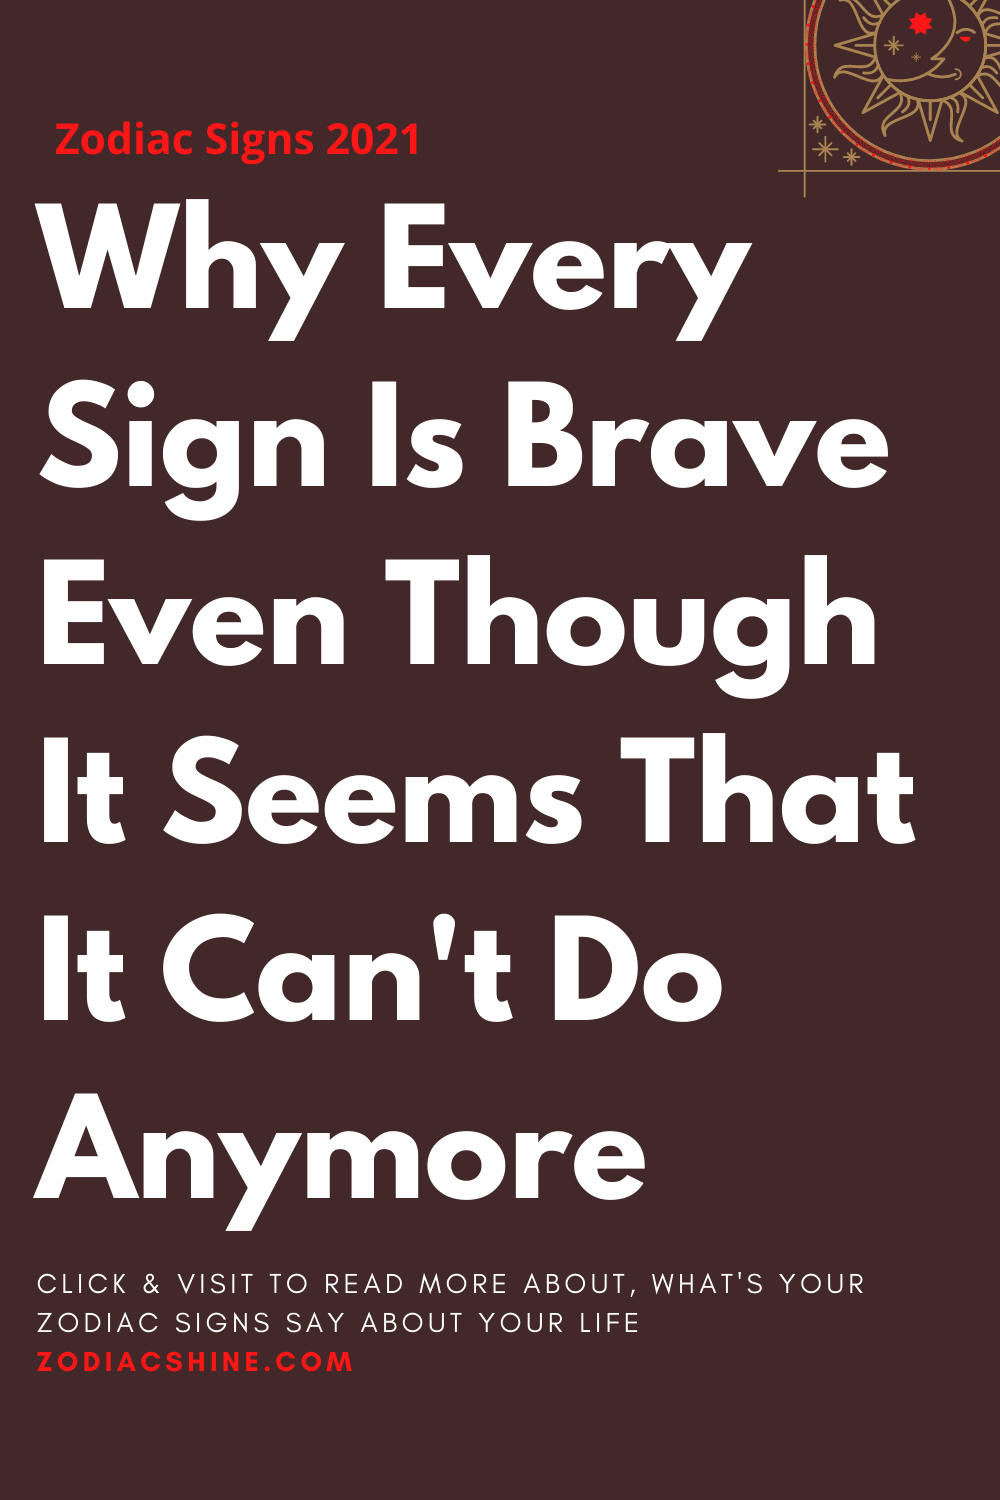 Why Every Sign Is Brave Even Though It Seems That It Can't Do Anymore